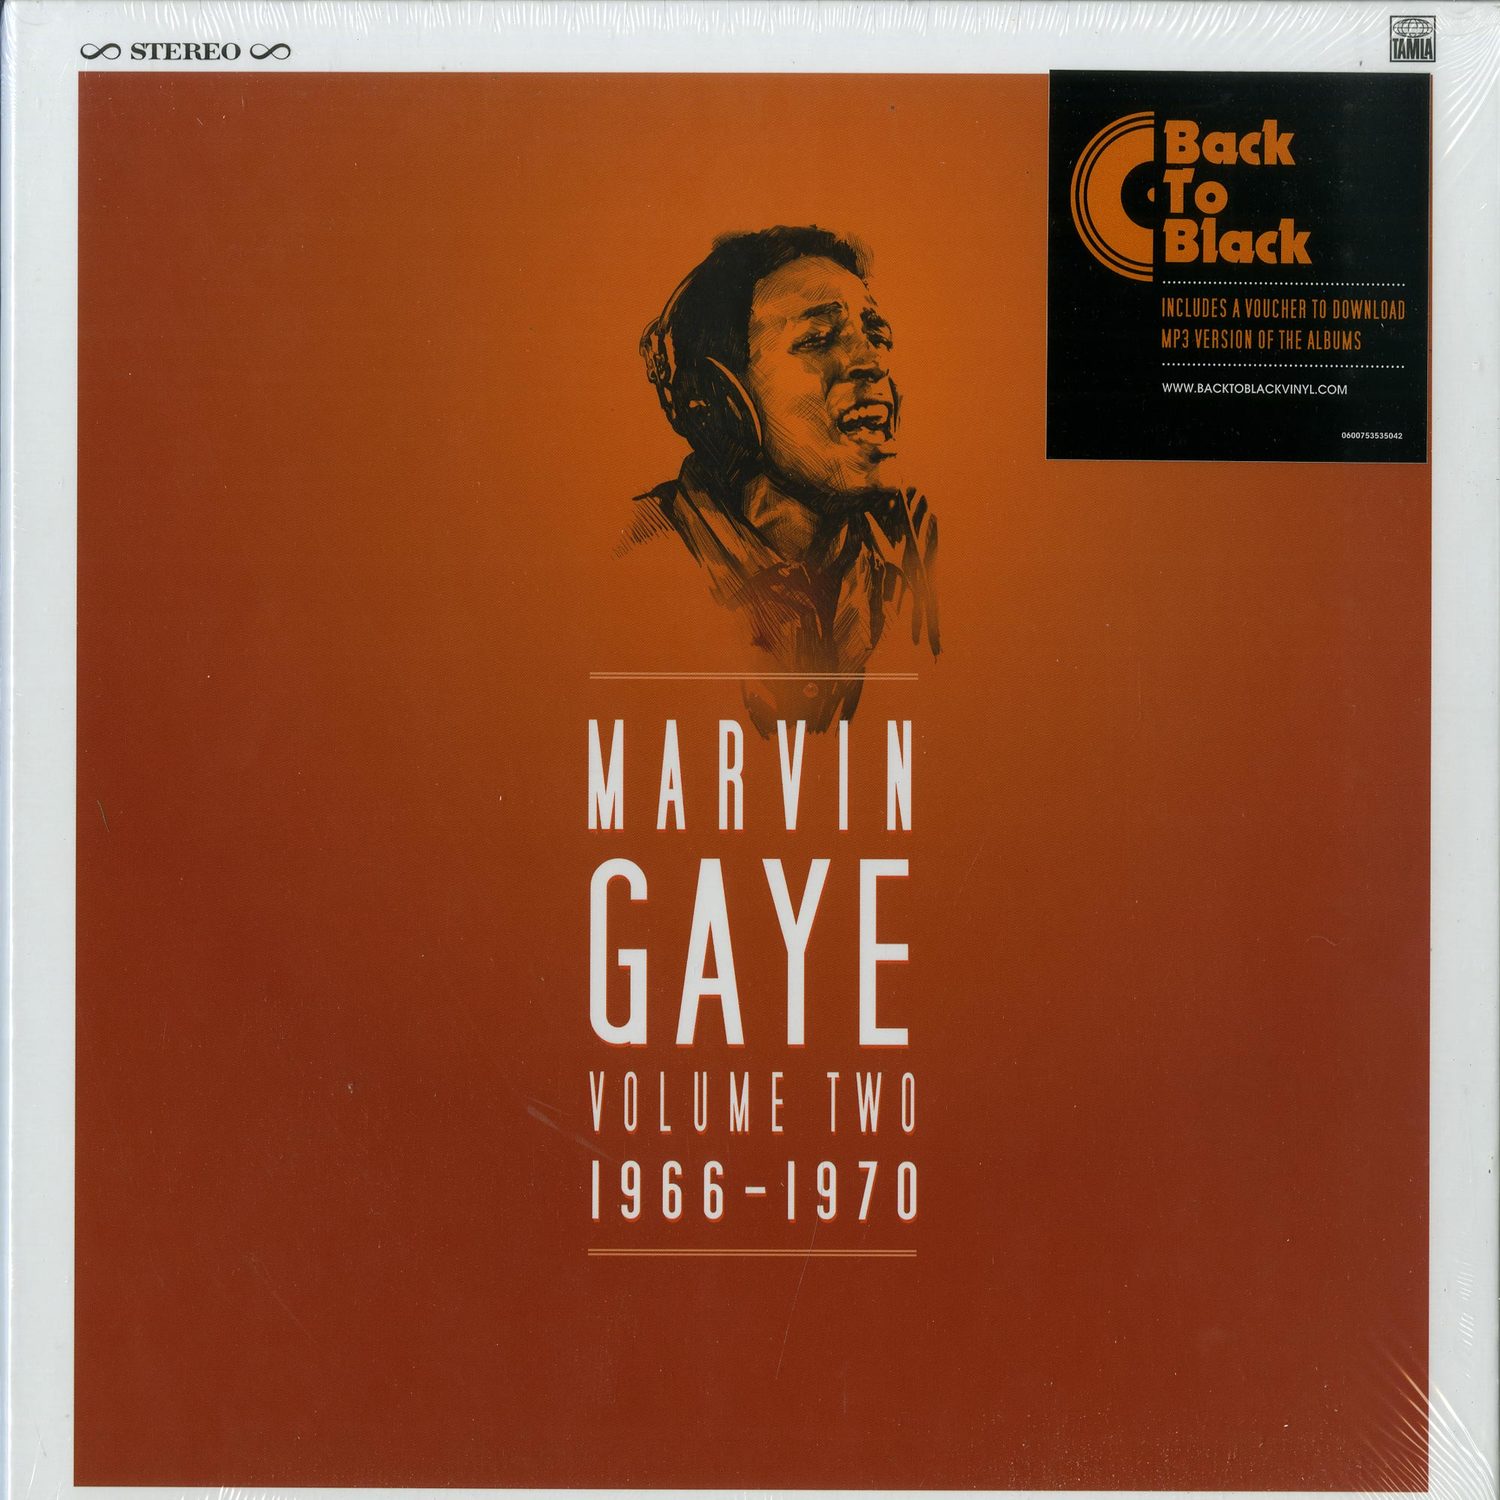 Marvin Gaye - VOLUME TWO: 1966-1970 